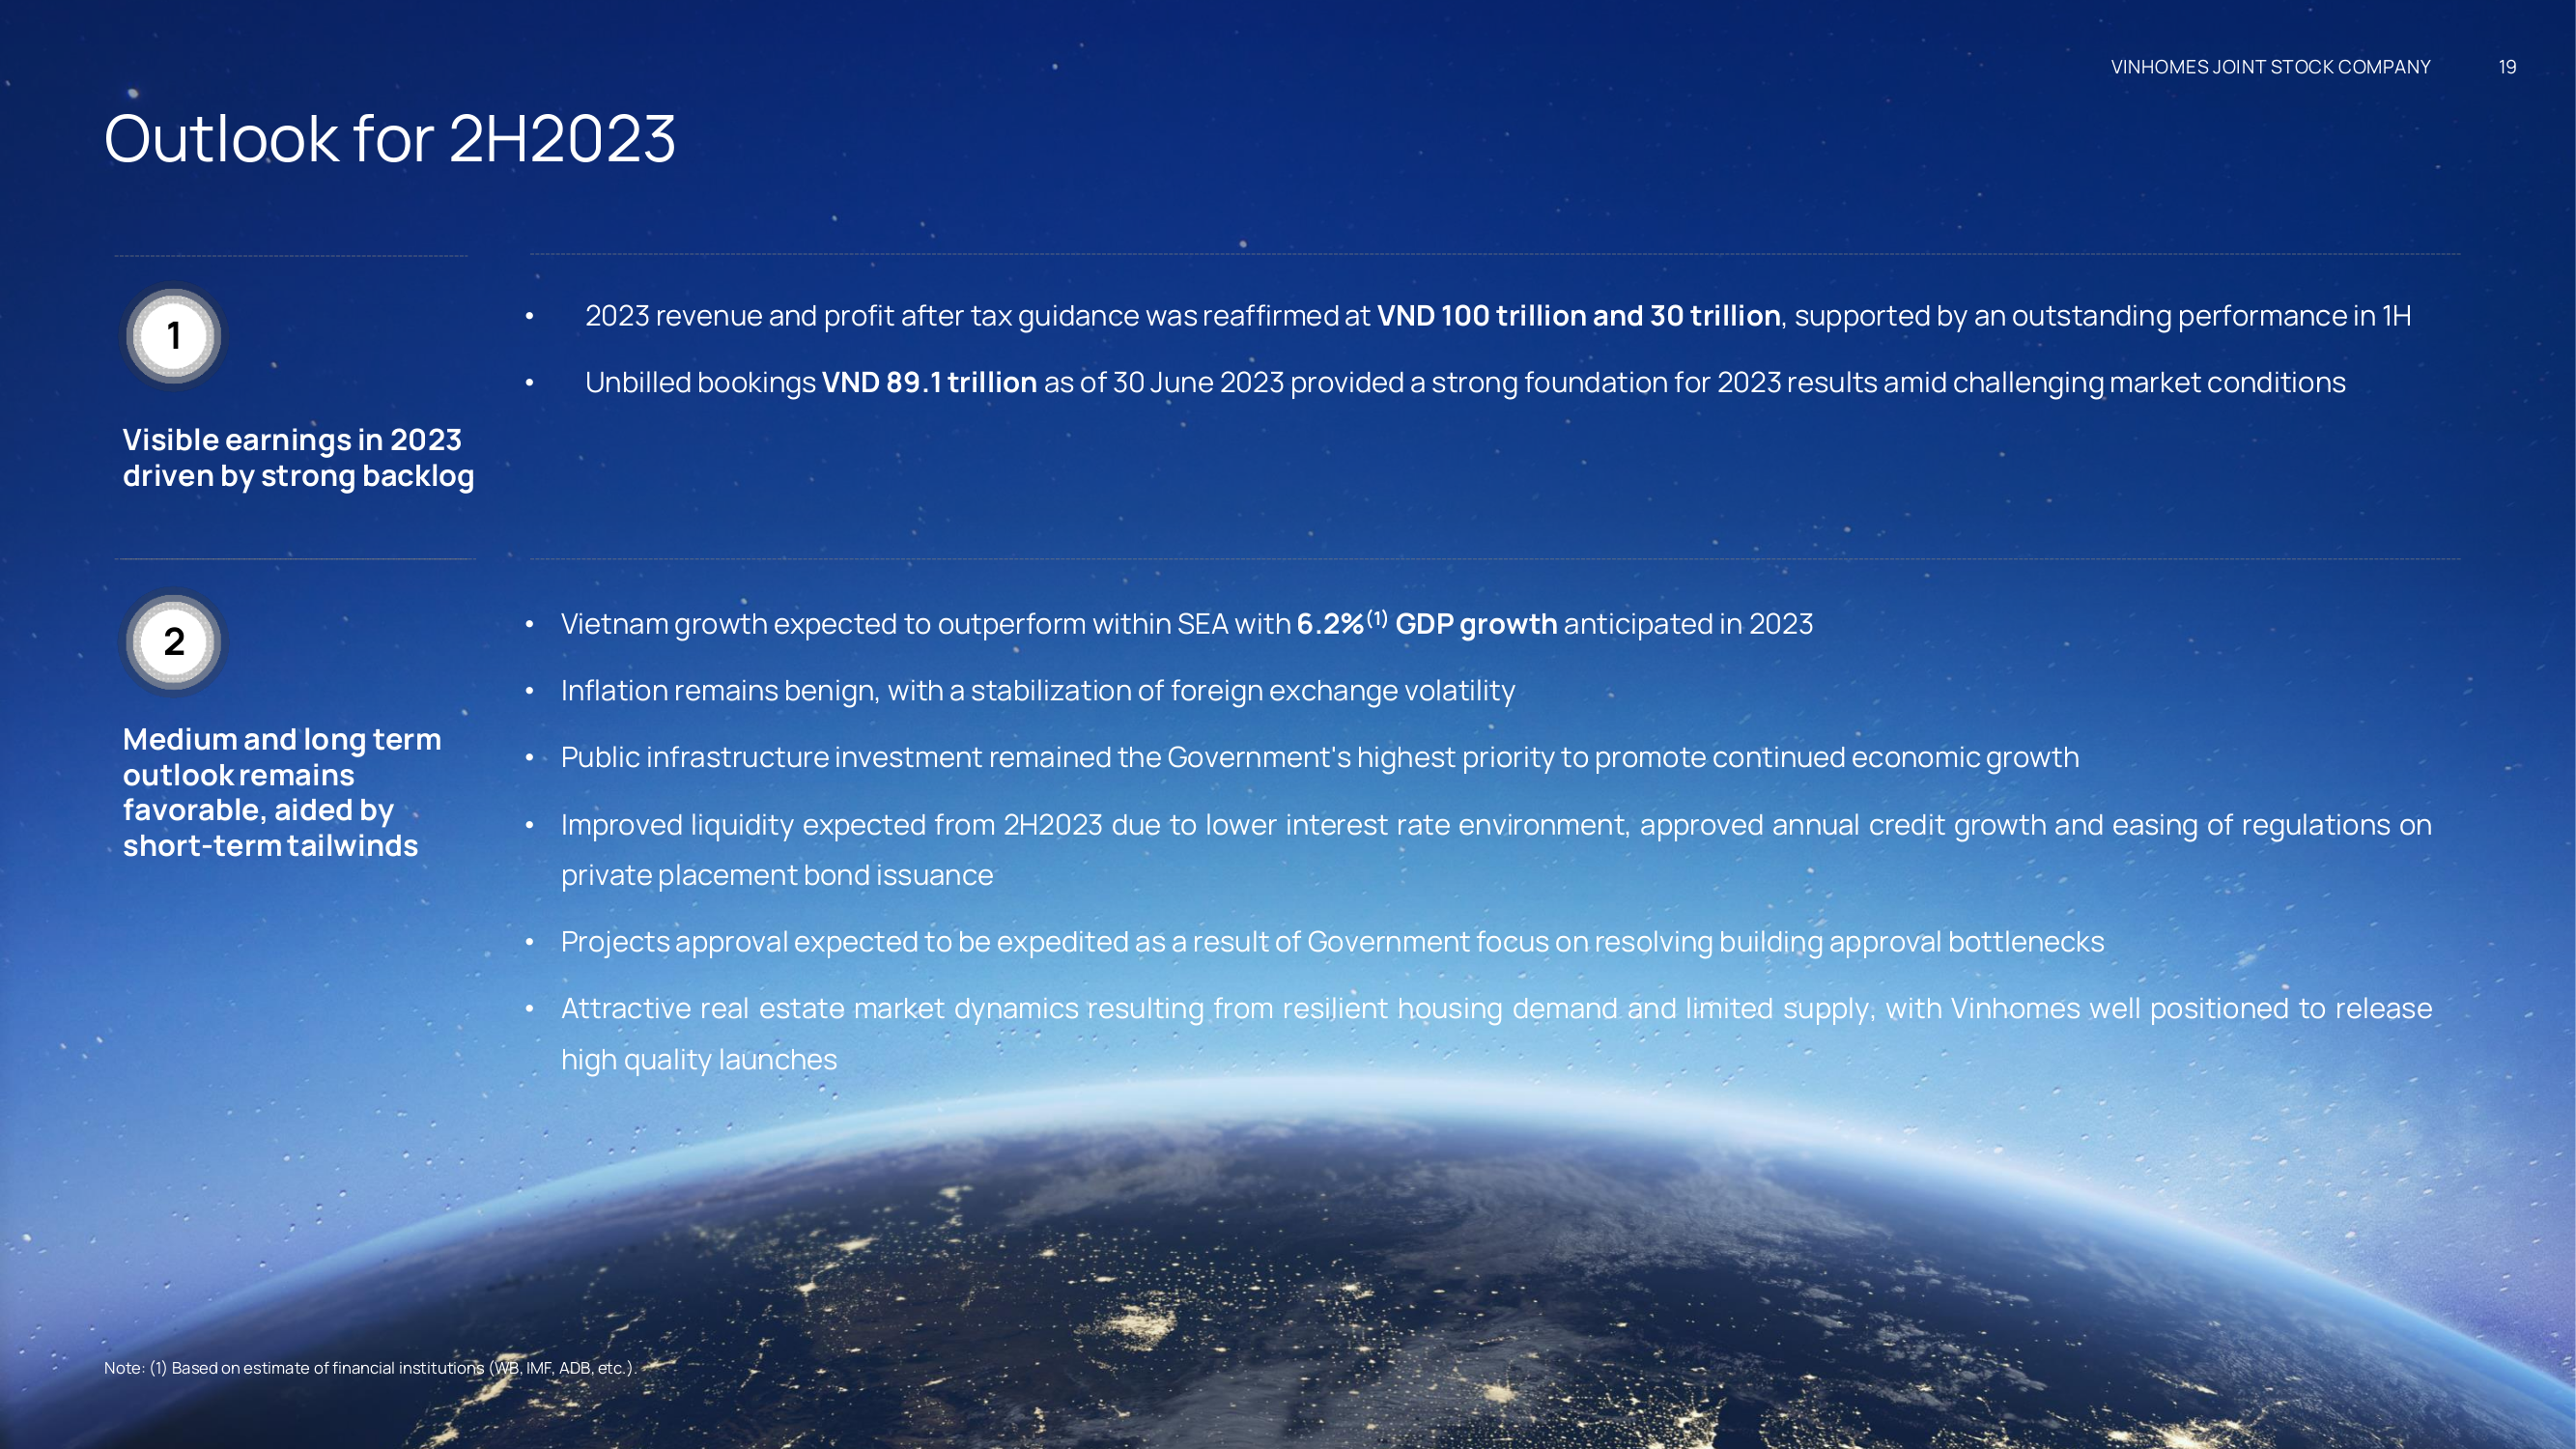 Outlook for 2H2023 
